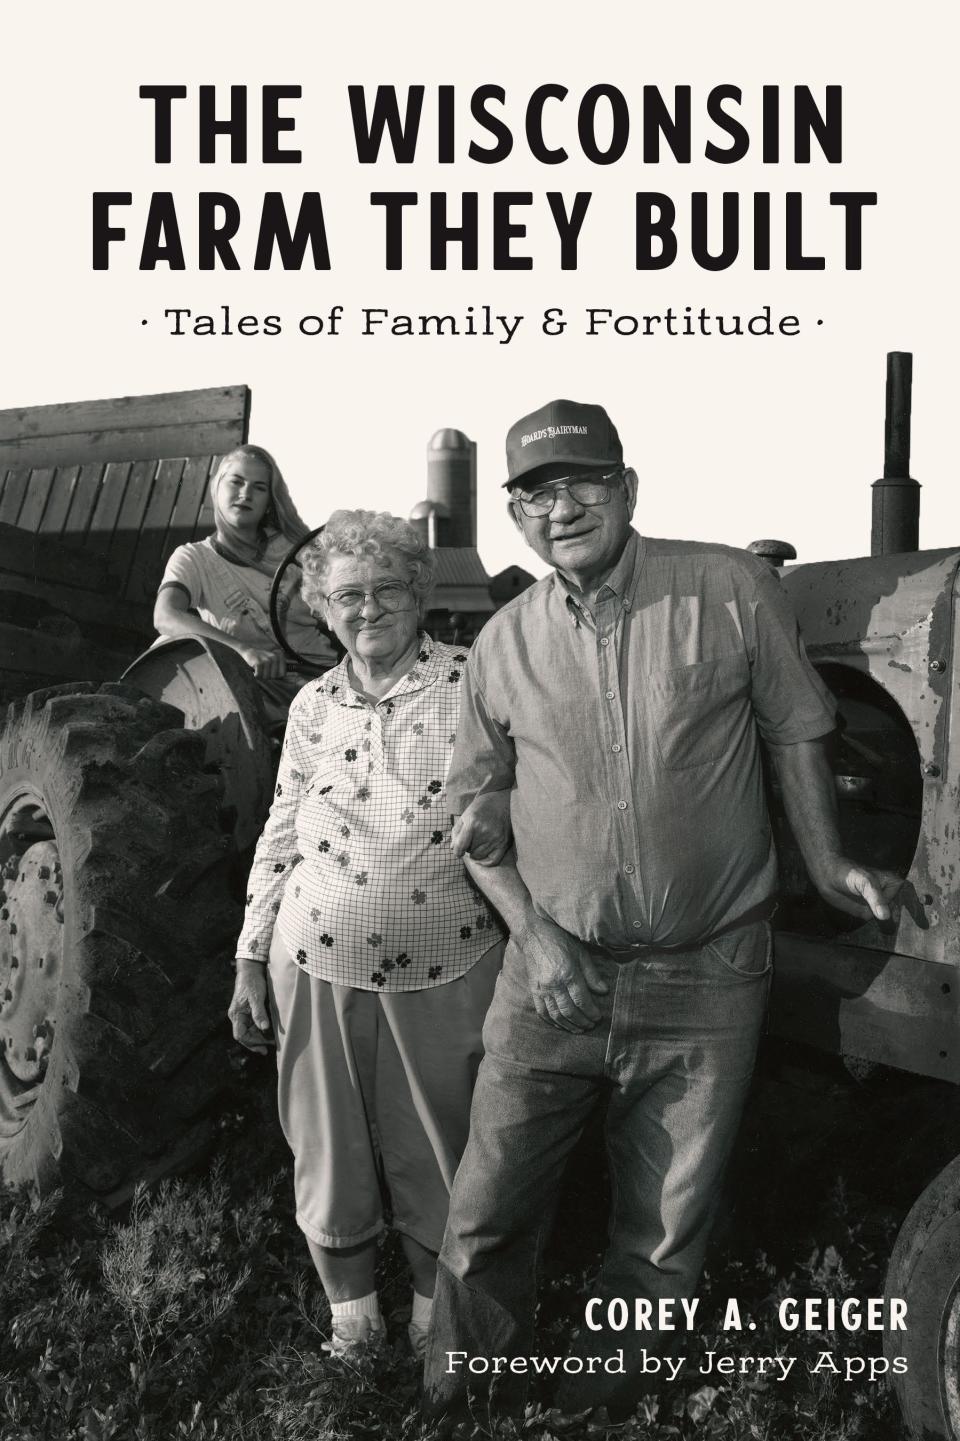 The cover of "The Wisconsin Farm They Built" by Corey A. Geiger.